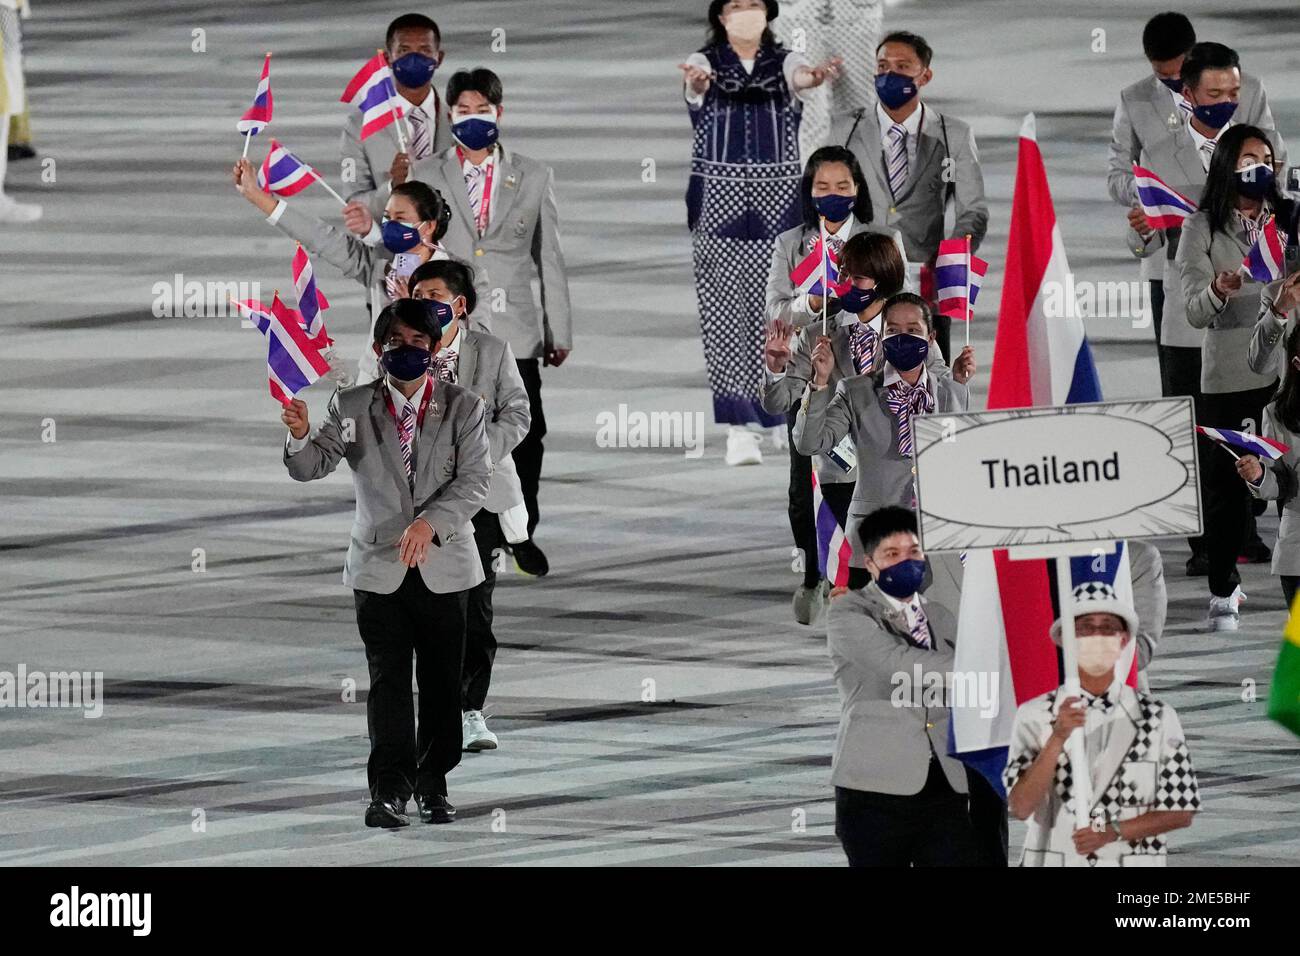 Athletes from Thailand march during the opening ceremony in the ...